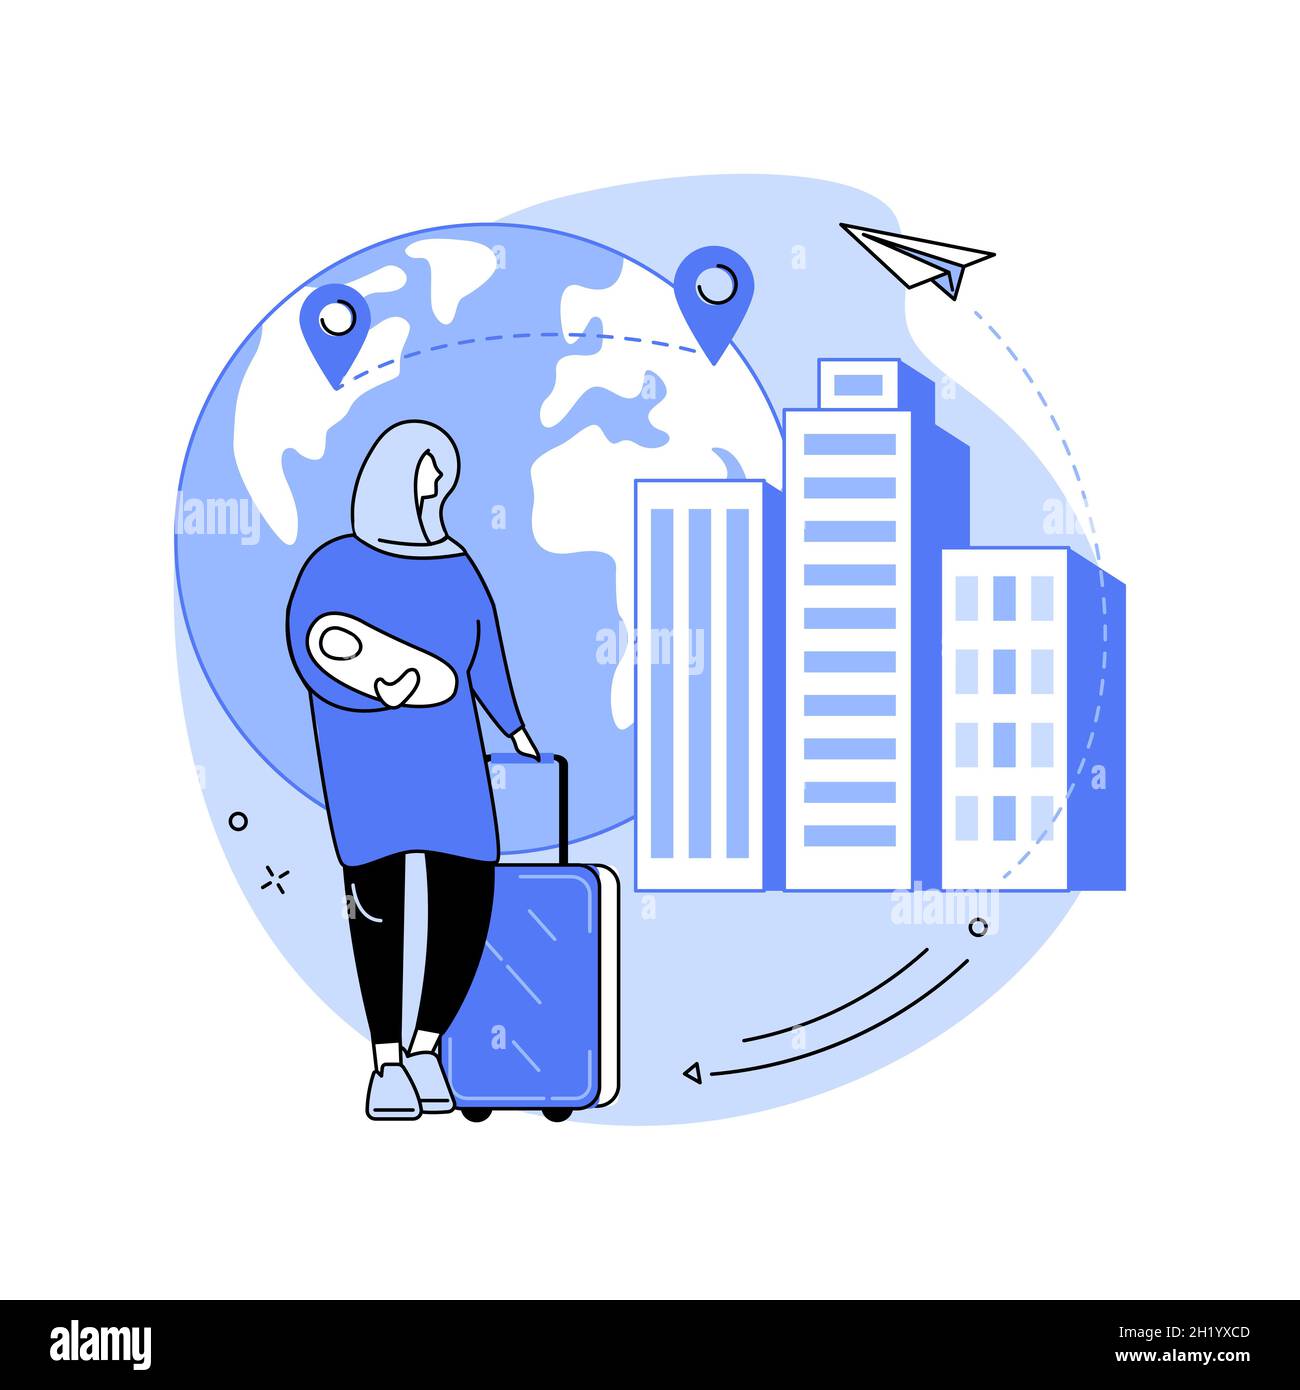 Female migrant abstract concept vector illustration. Stock Vector